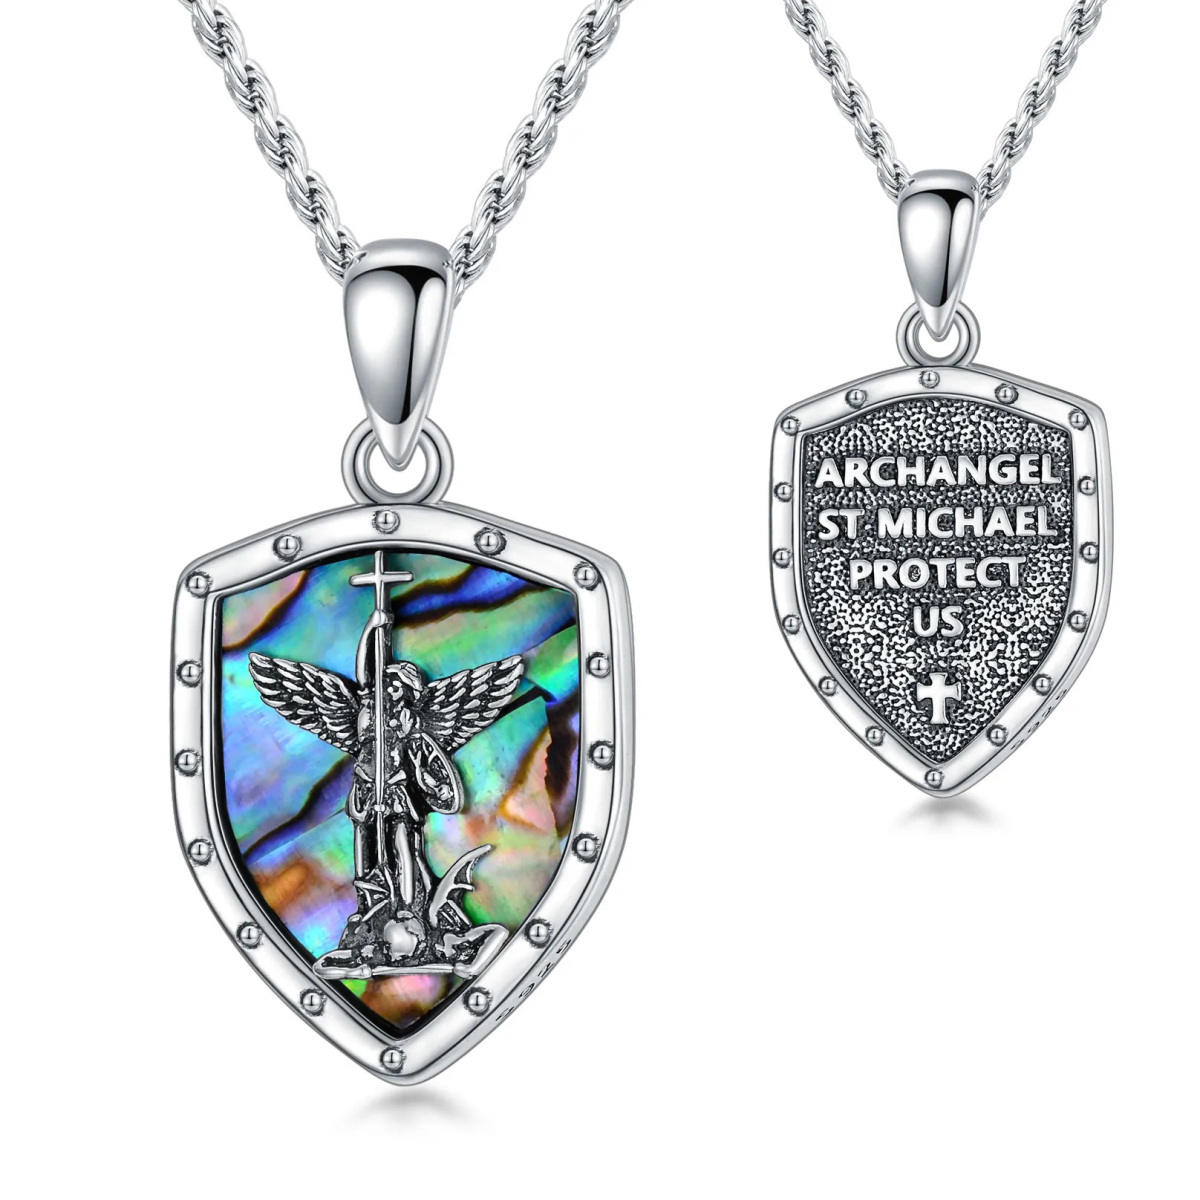 Collier en argent sterling Abalone Shellfish Saint Michael Shield Pendant Necklace with Engraving Words-1